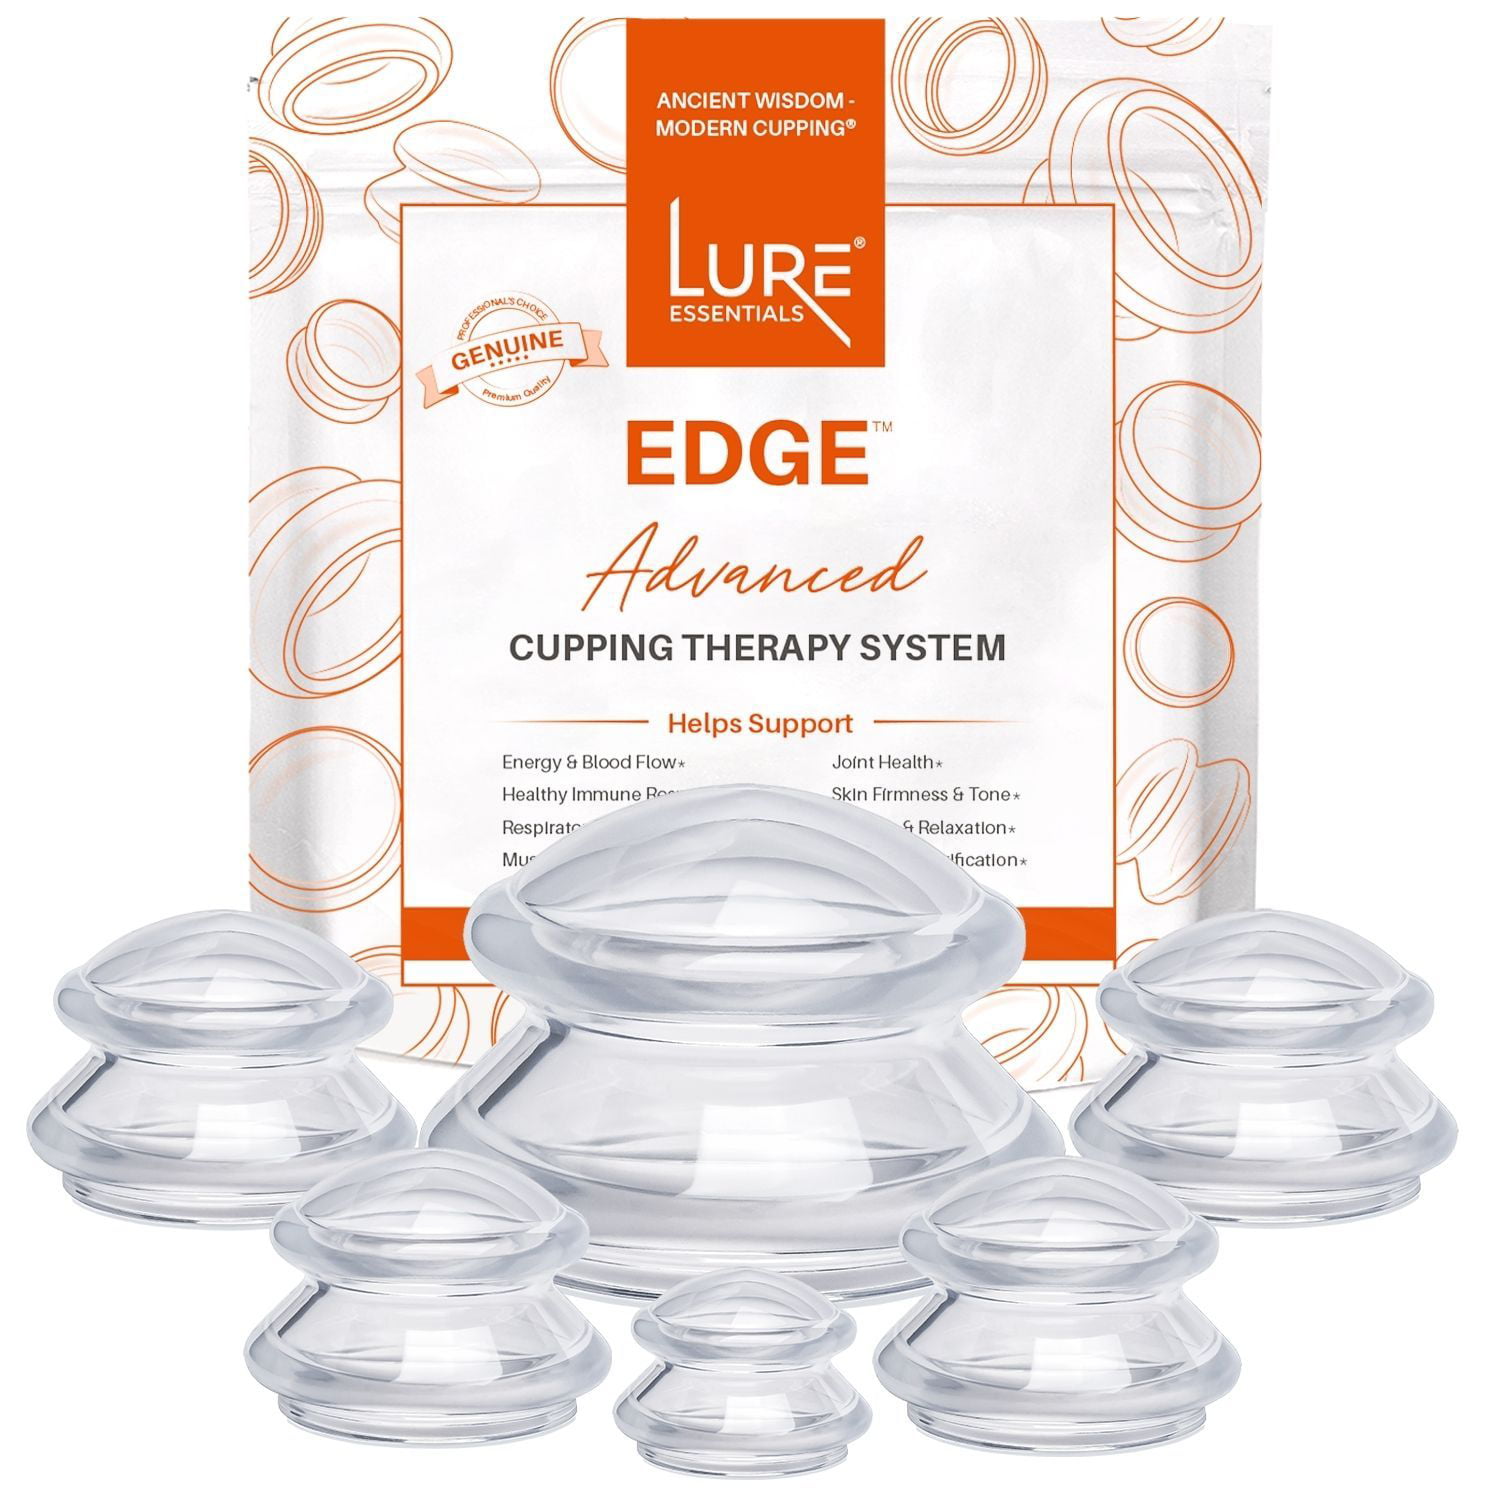 LURE Essentials Edge Cupping Set – Ultra Clear Silicone Cupping Therapy Set  for Cellulite Reduction and Myofascial Release - Massage Therapists and  Home Use (Set of 6, Clear) 